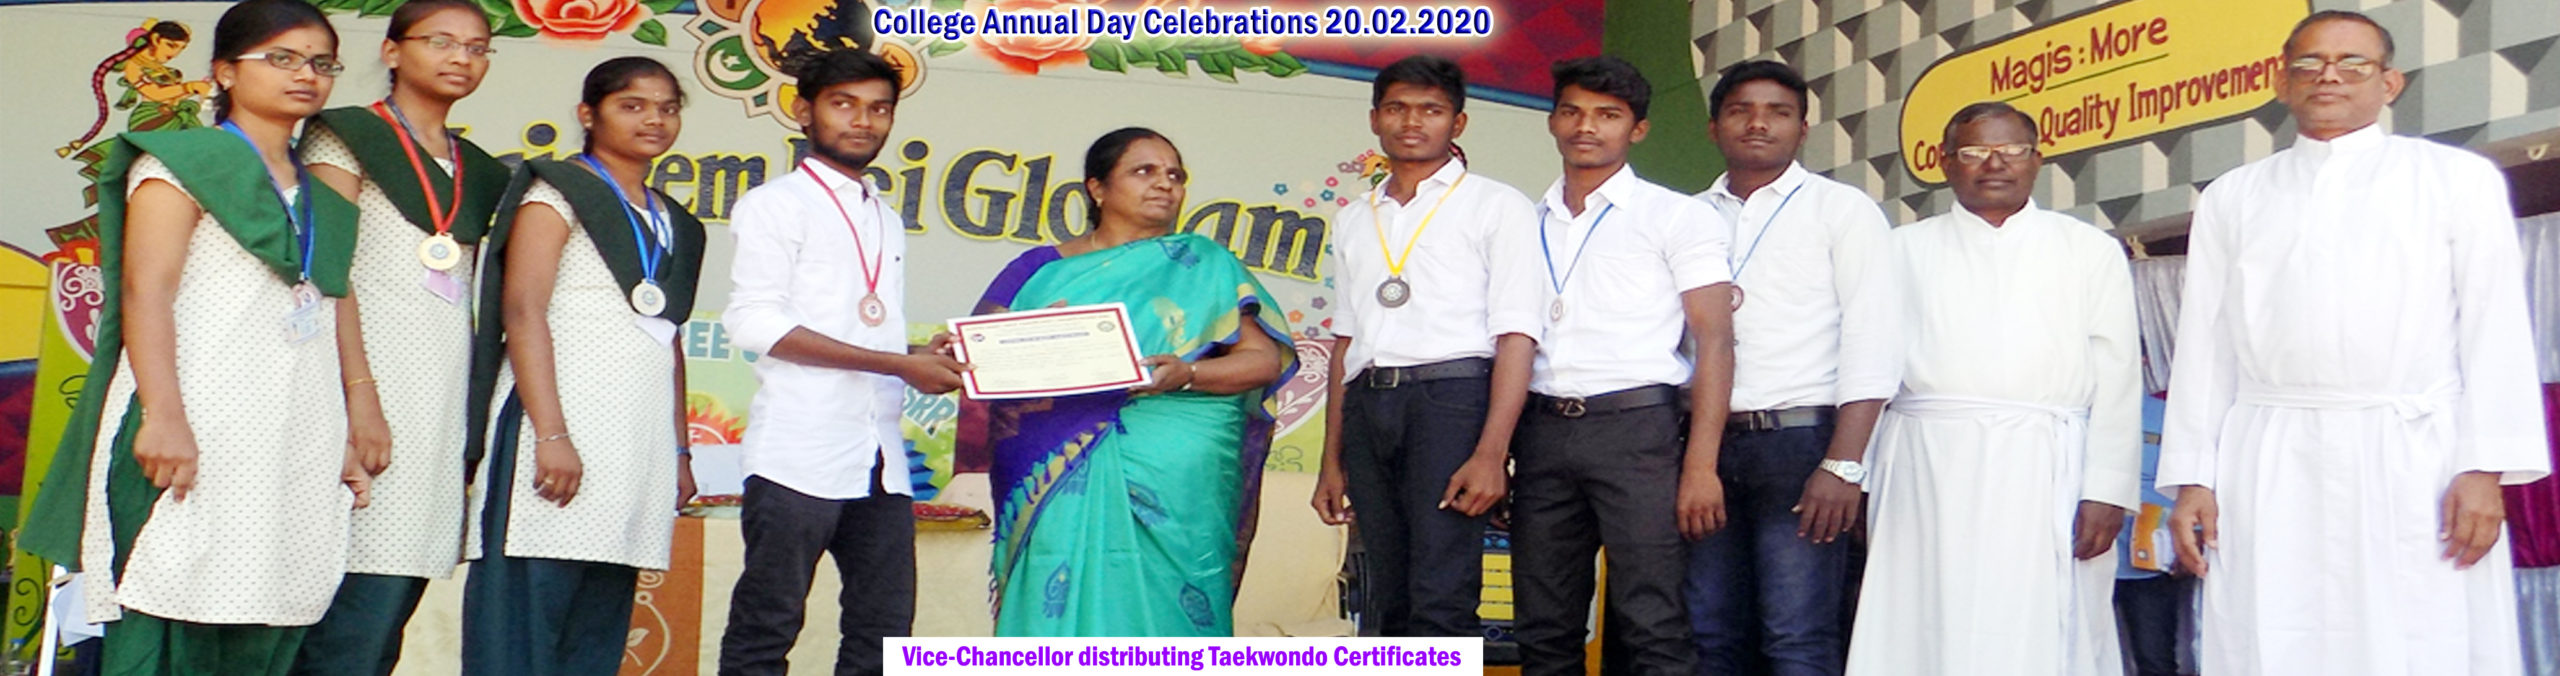 College Annual Day Celebrations